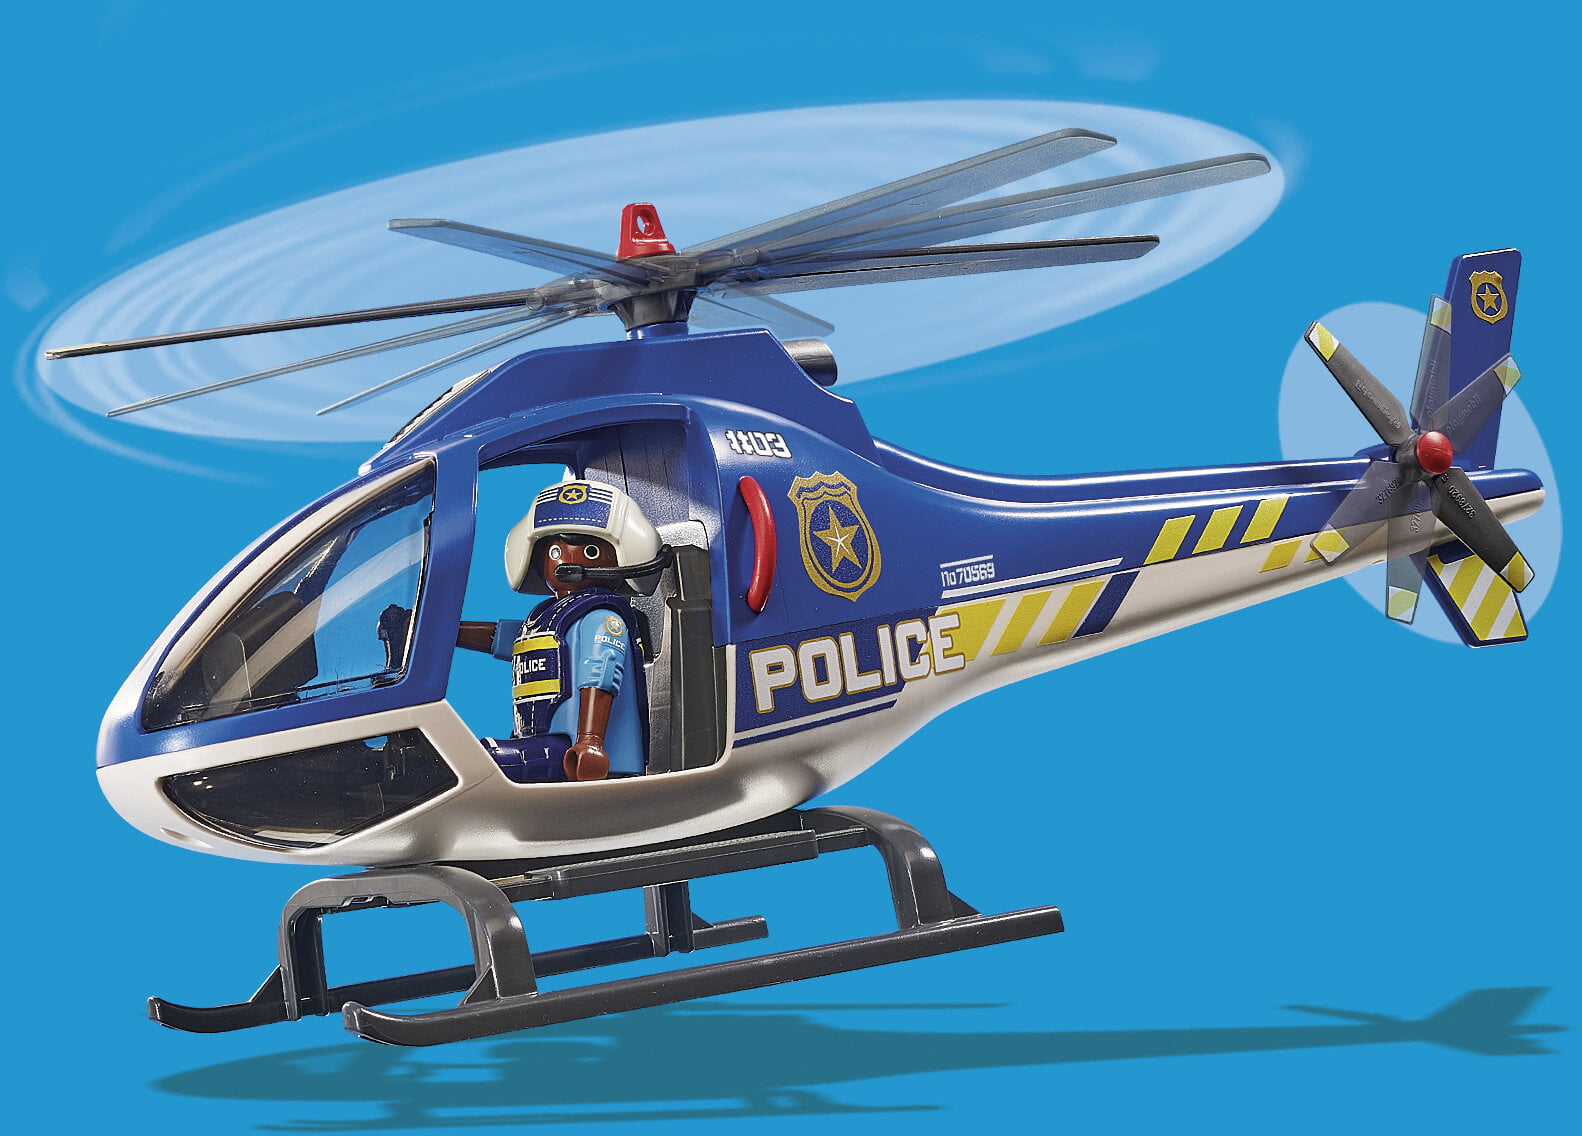 PLAYMOBIL police helicopter ref 4267 from 4 years